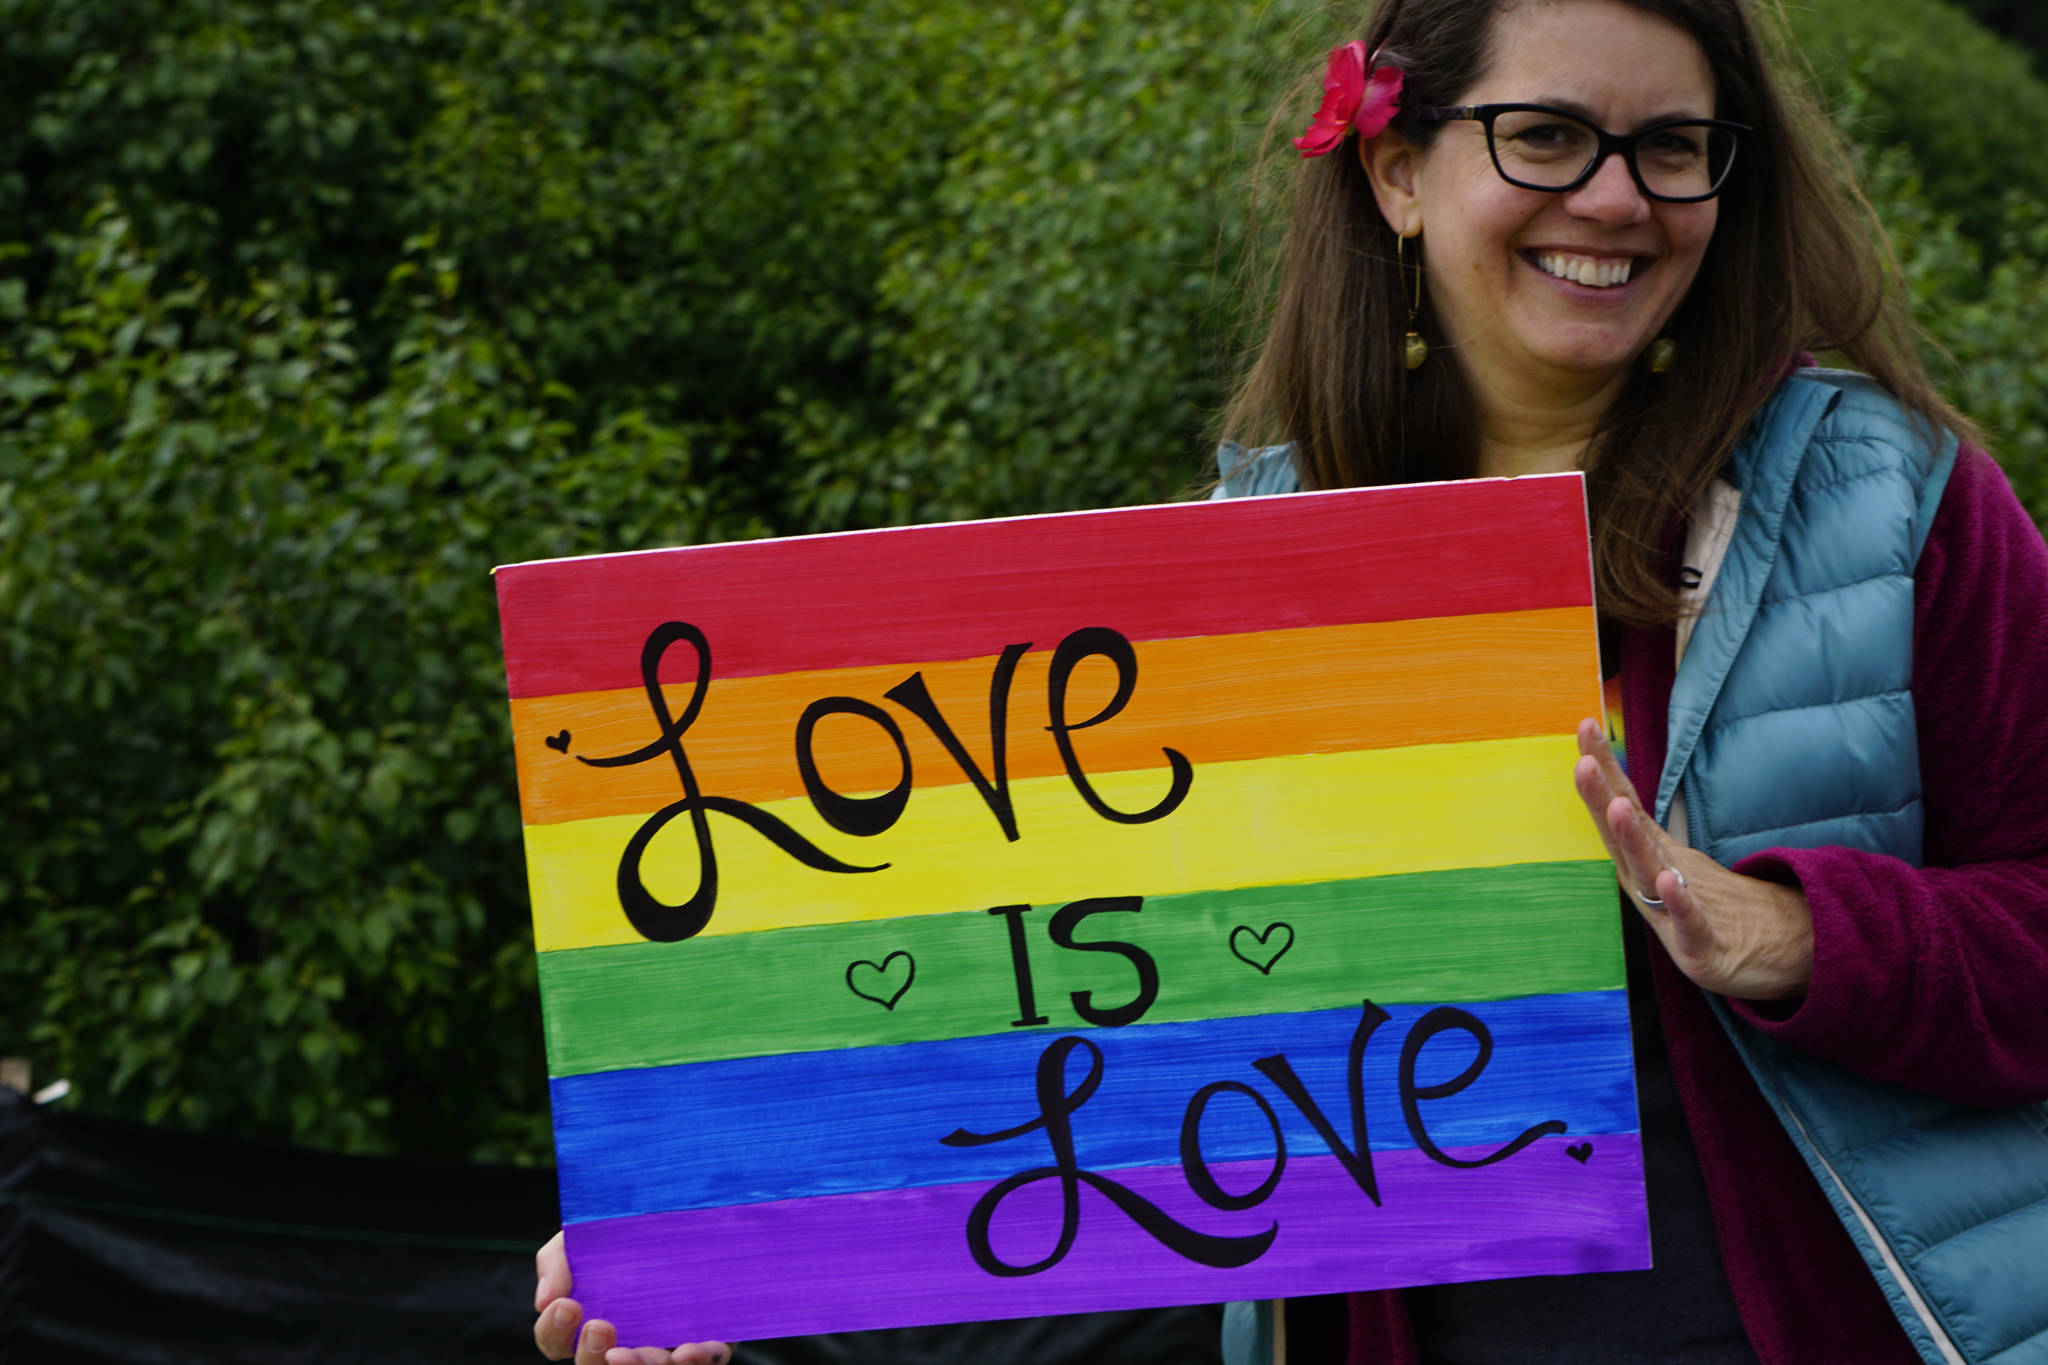 Kevyn Jalone shows a sign she carried in the Pride March on Saturday, June 23, 2018 in Homer, Alaska. (Photo by Michael Armstrong/Homer News)